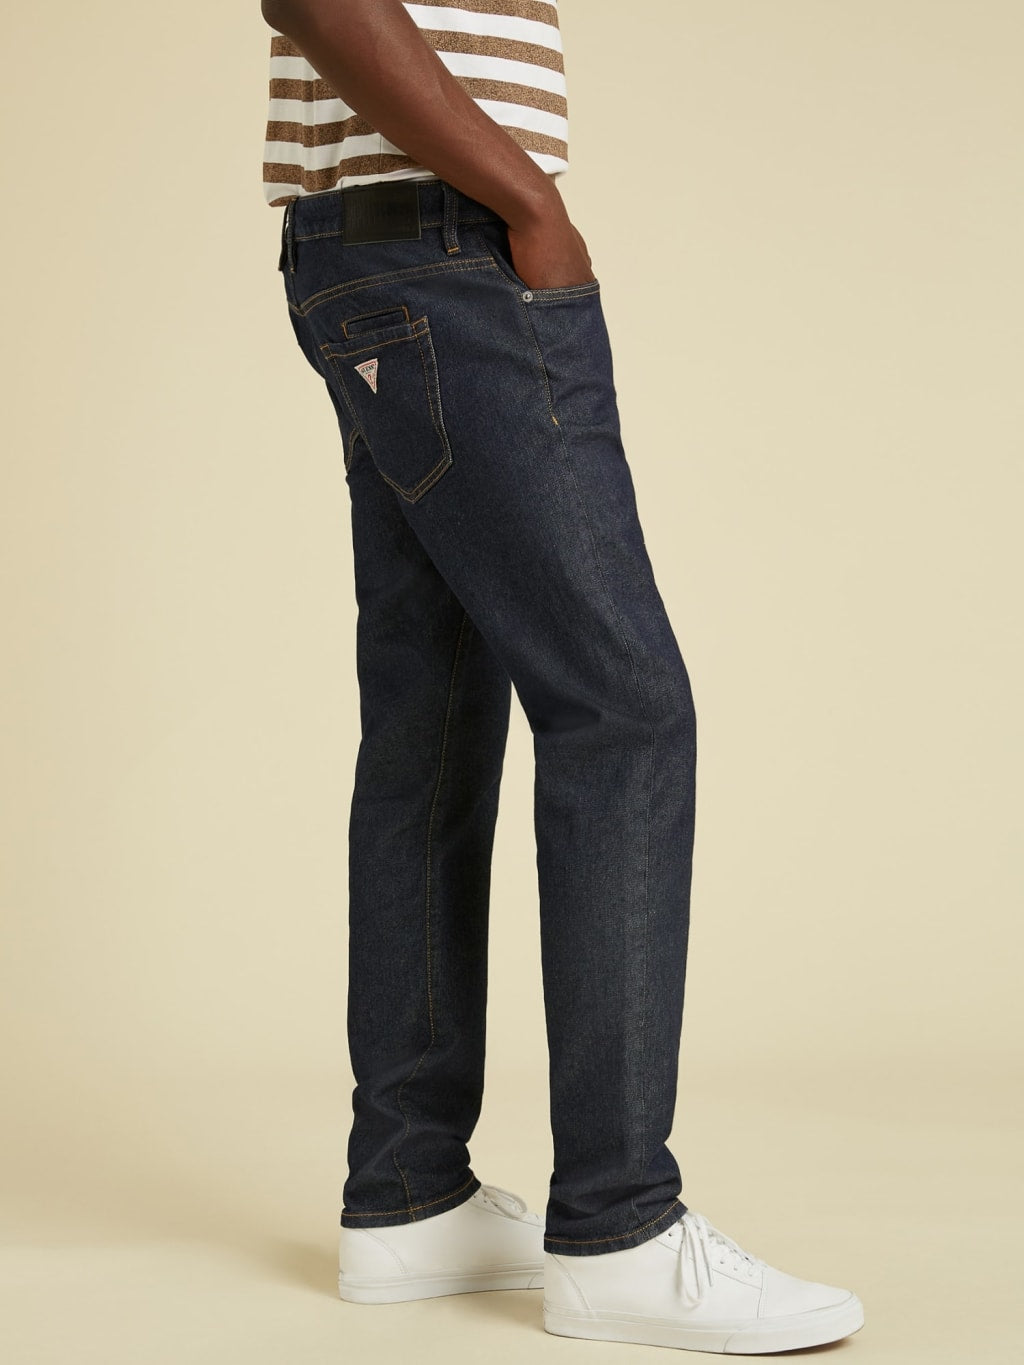 GUESS Originals Slim Straight Jeans - Guess